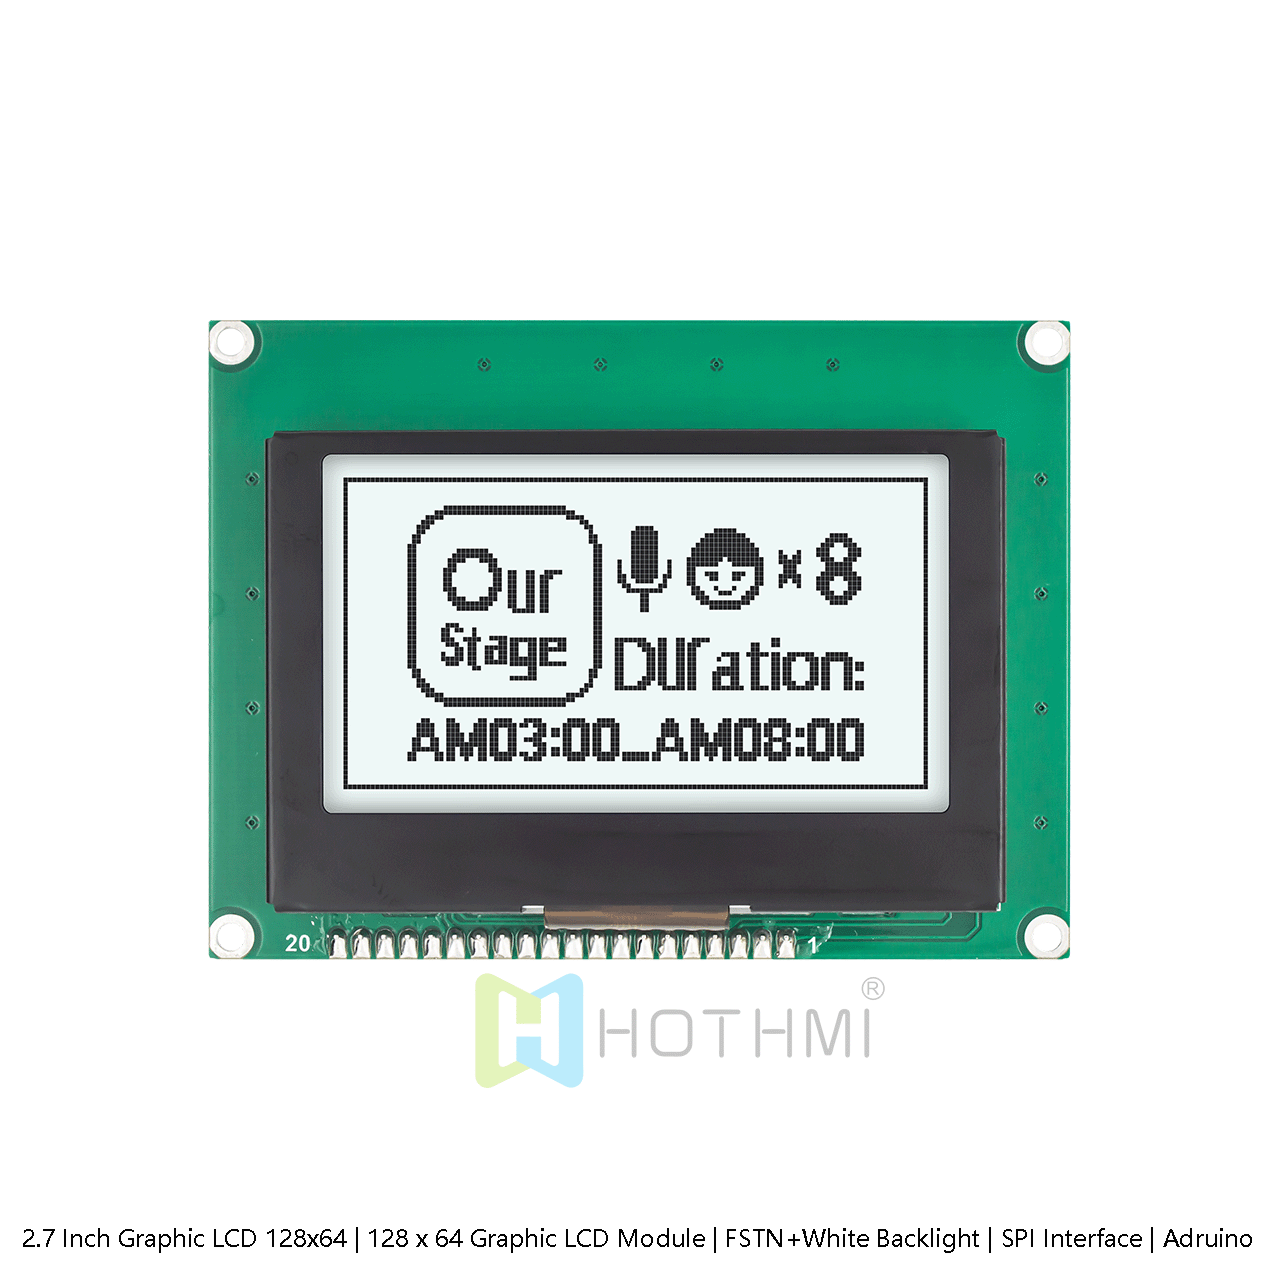 2.7 Inch Graphic LCD 128x64 | 128 x 64 Graphic LCD Module | FSTN+White Backlight | SPI Interface | Adruino | White Background with Gray Text